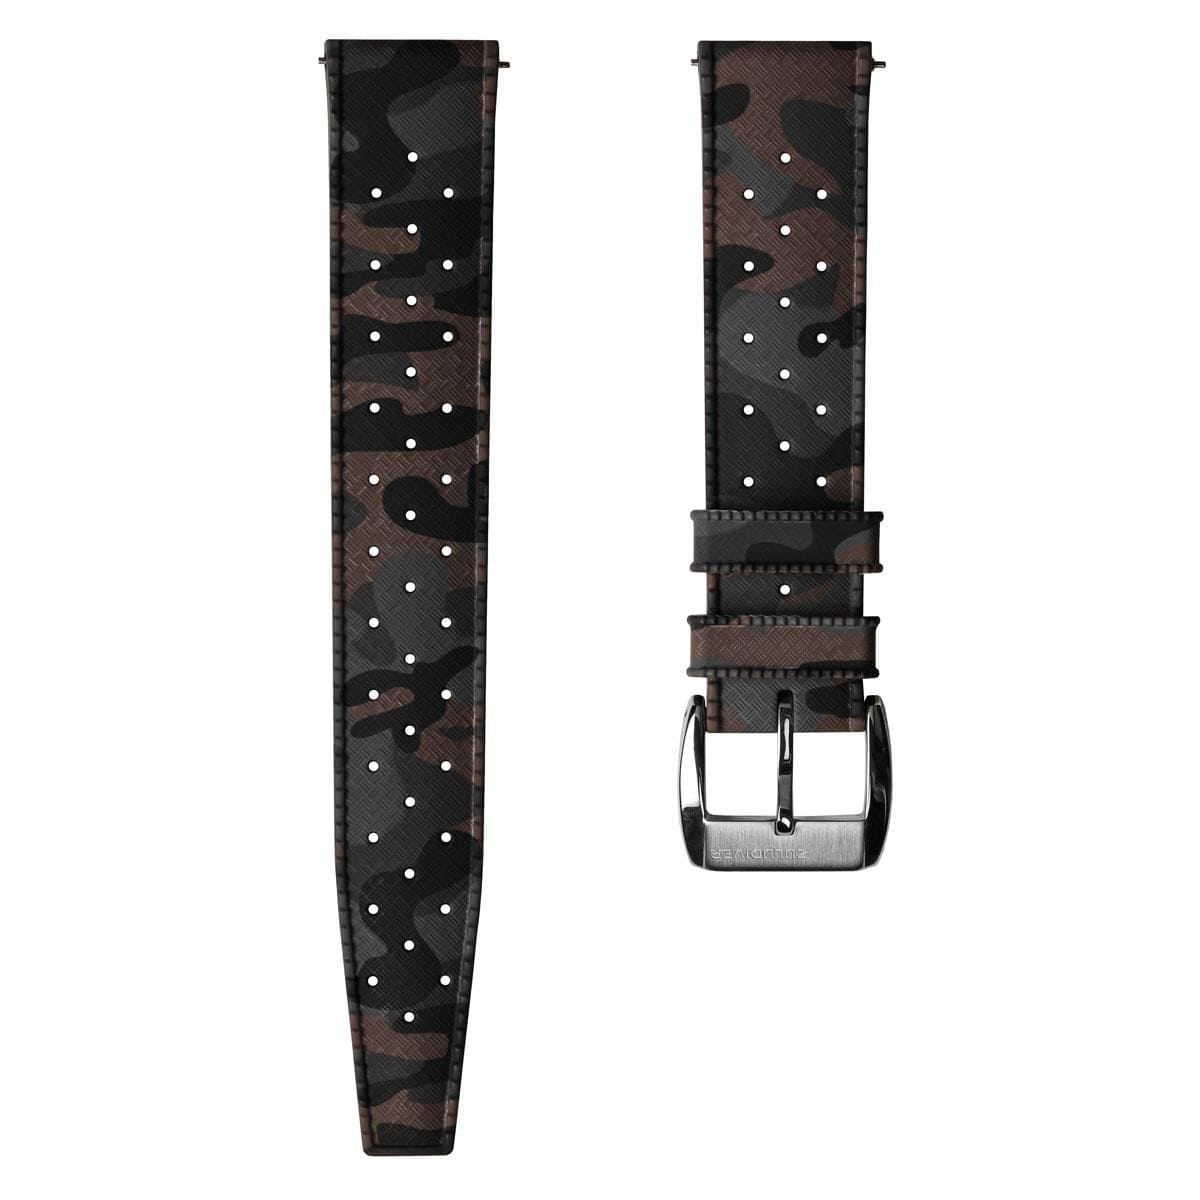 ZULUDIVER Tropic Style FKM Rubber Watch Strap - Camouflage Brown